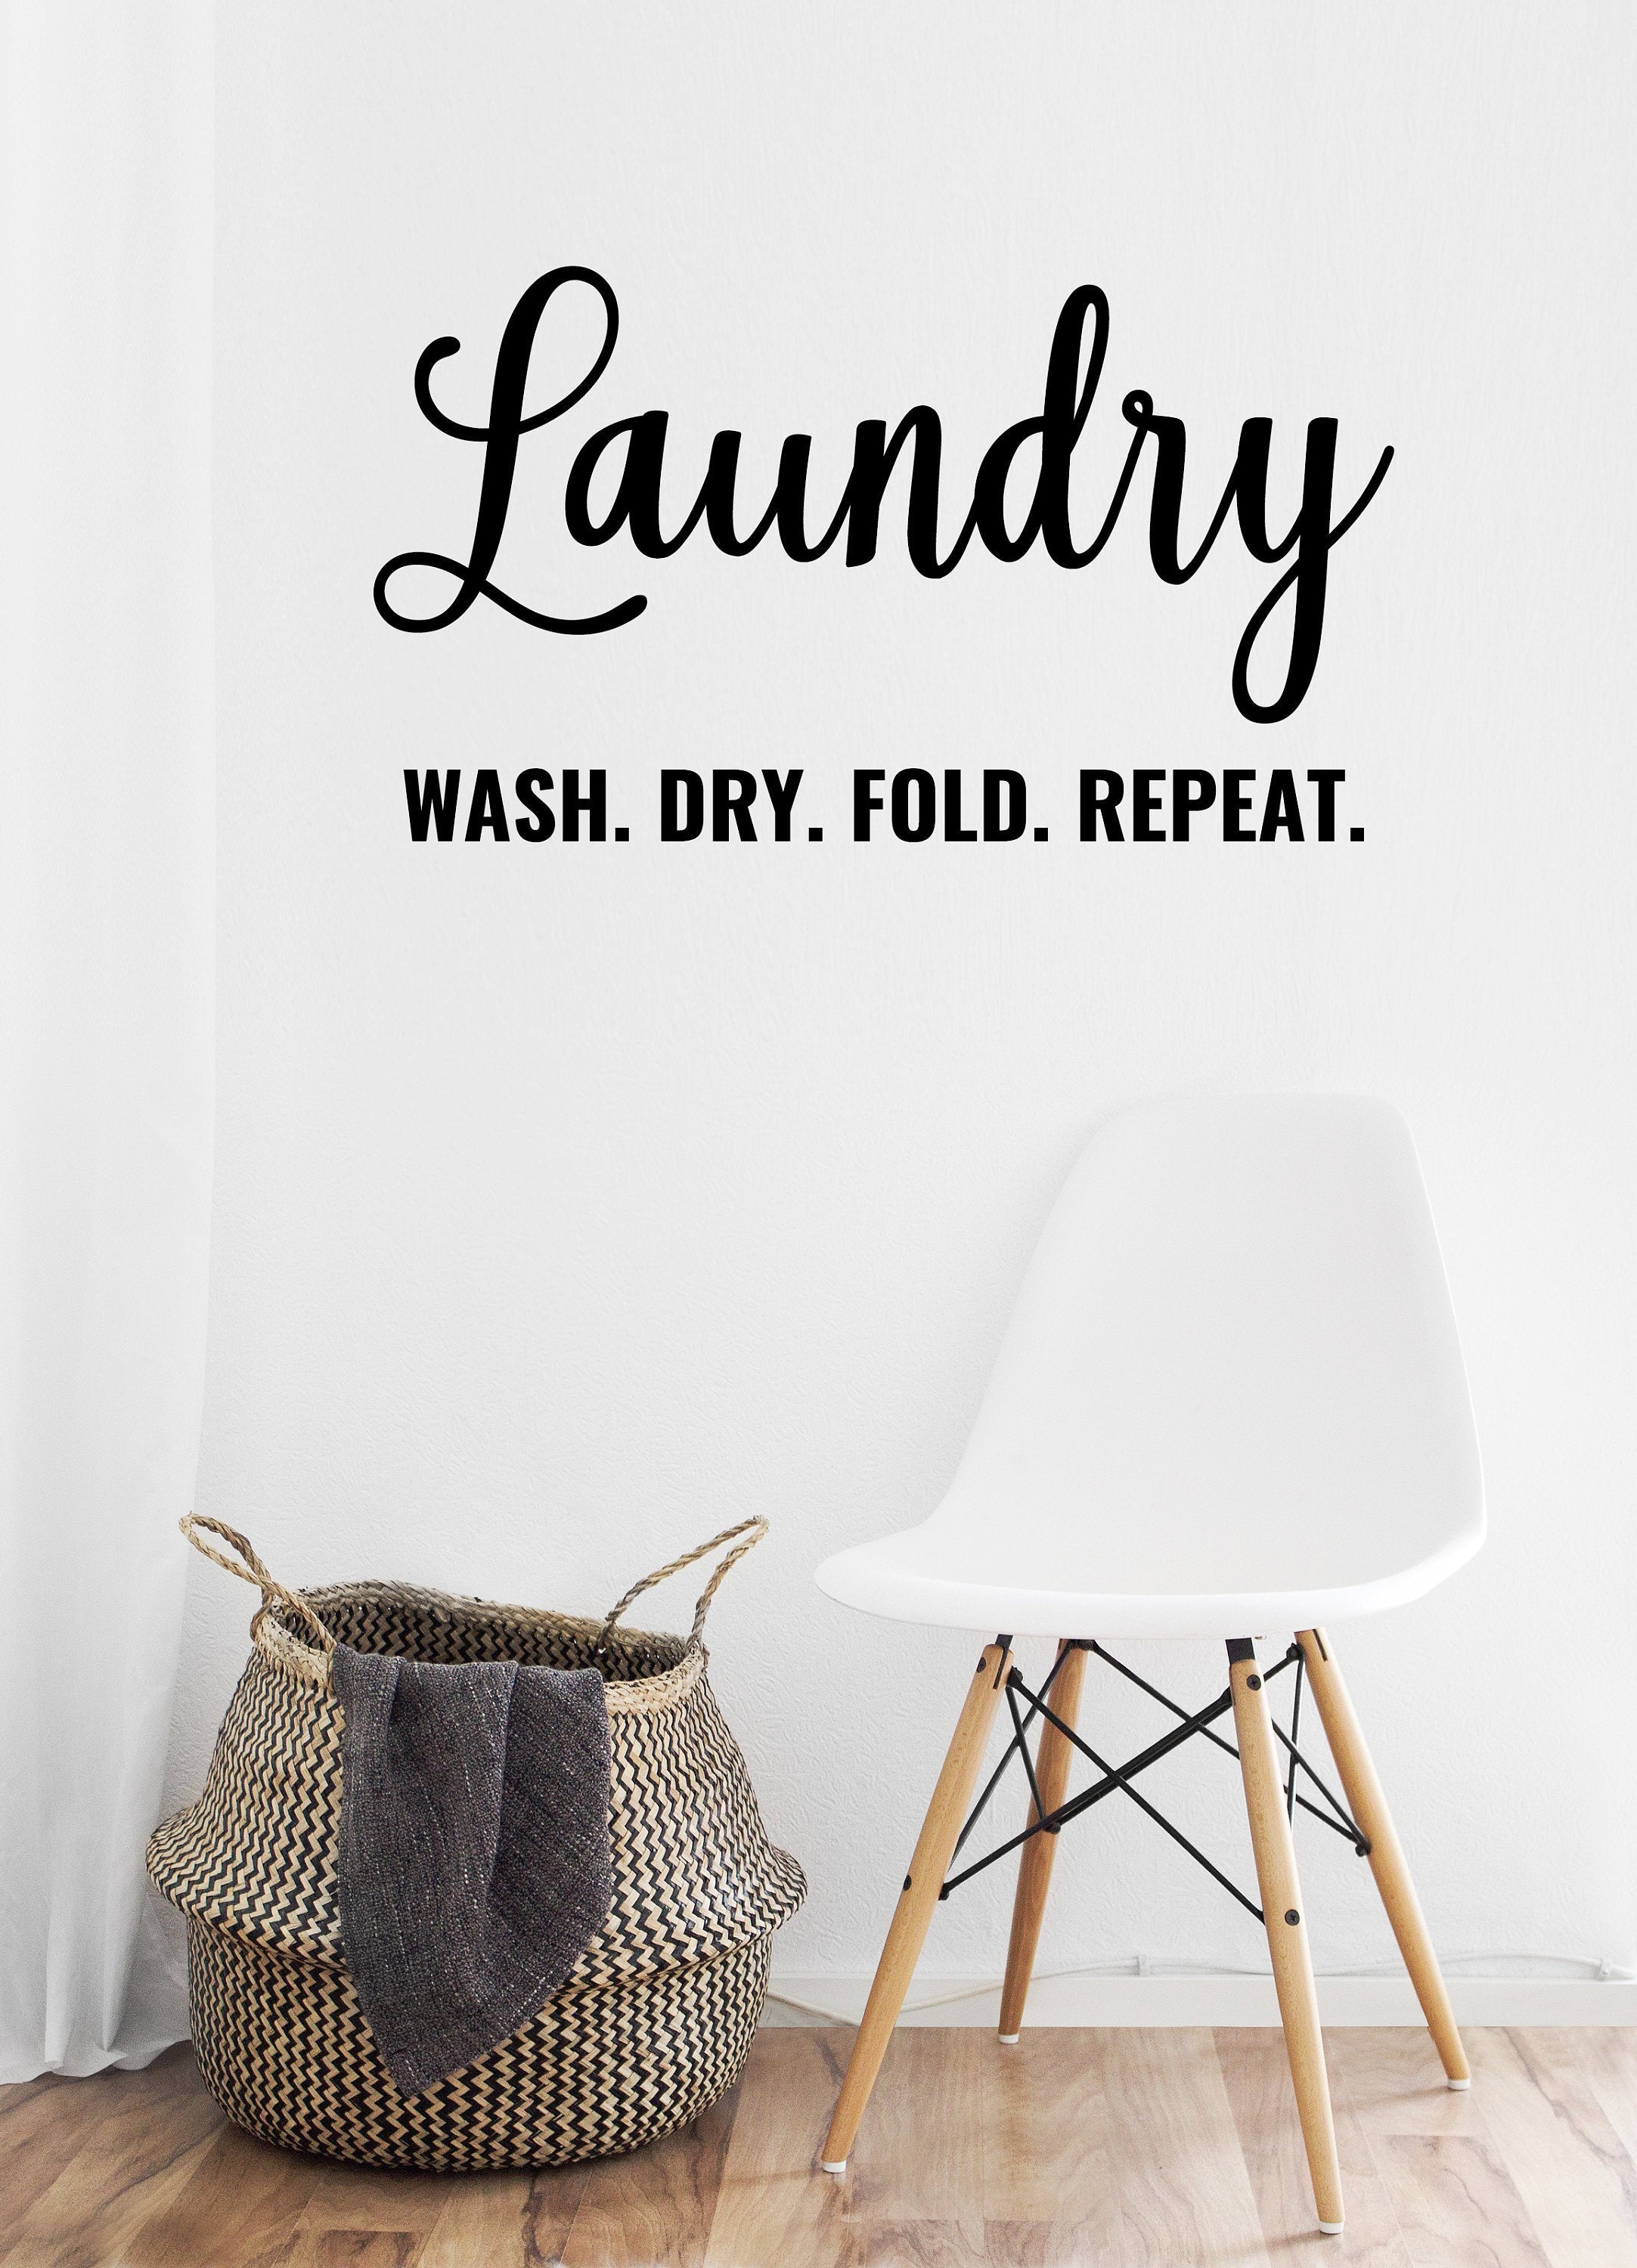 Laundry Wash Dry Fold Repeat - Vinyl Decal for Laundry Room, Kitchen, Walls, Homes and More!